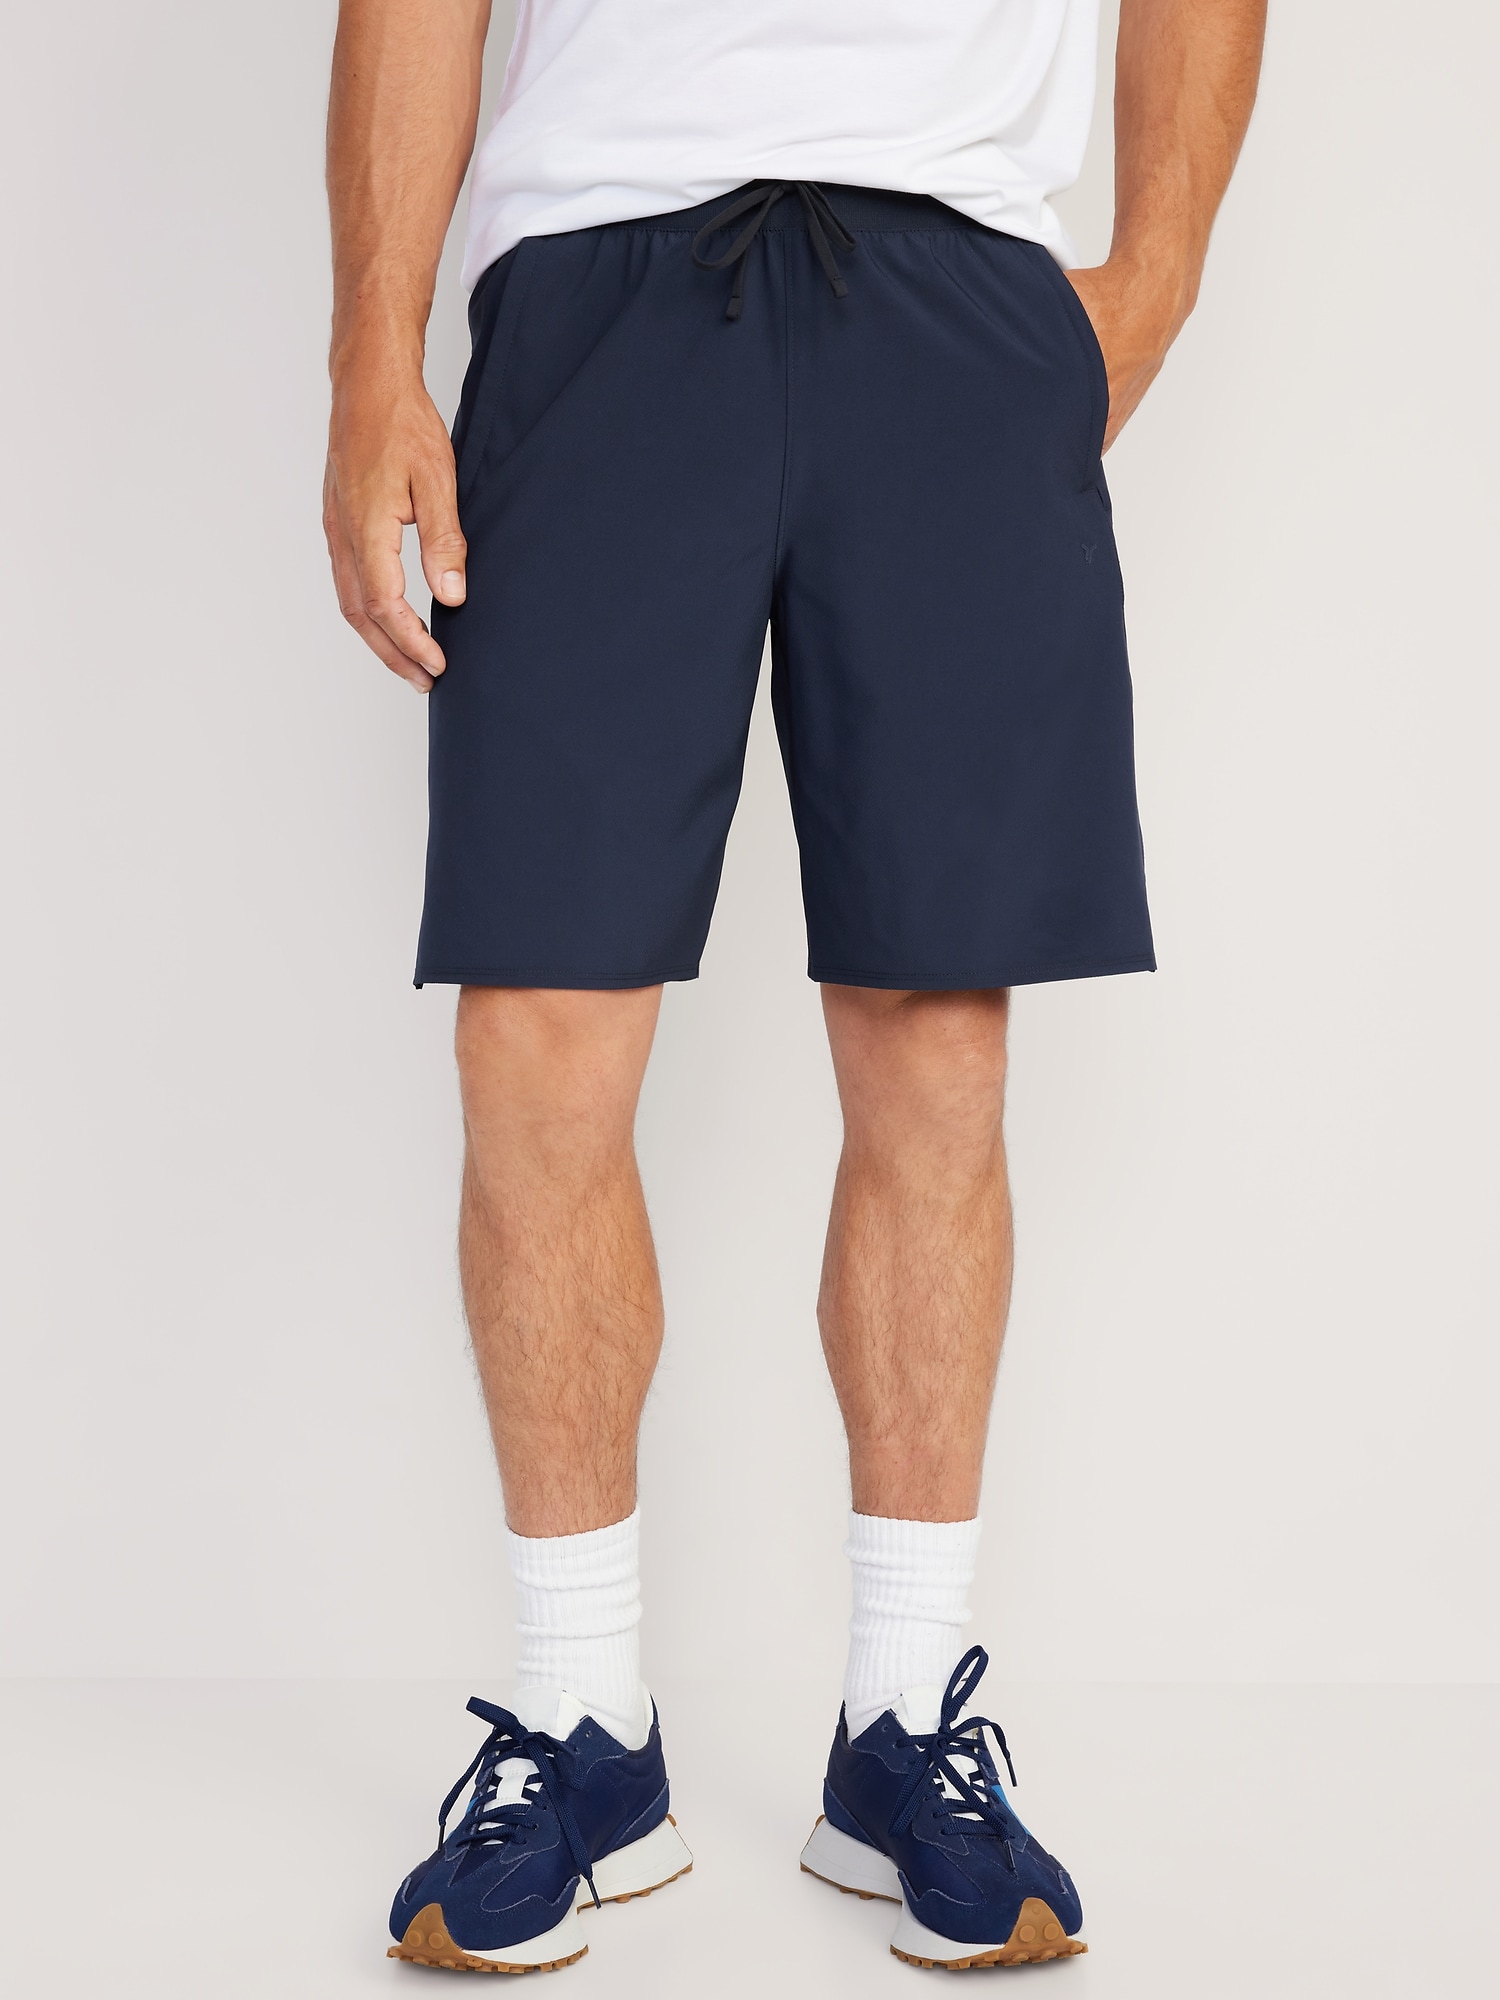 Gym Shorts With Built In Liner